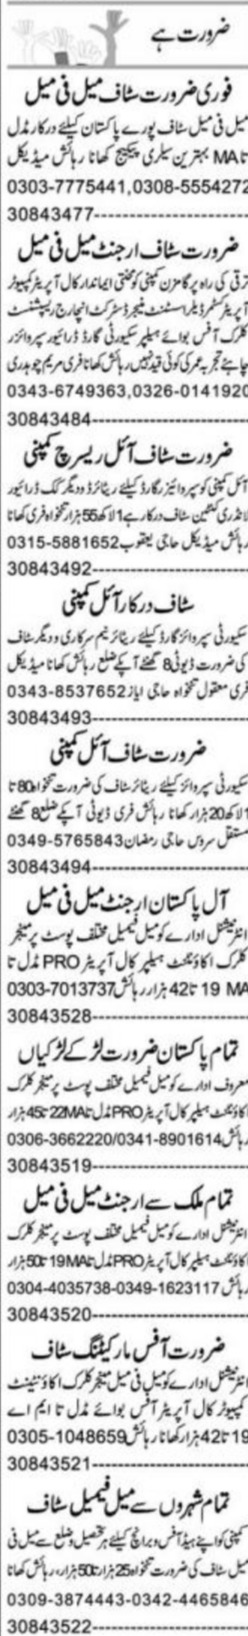 Management Staff Jobs At Private Company In Multan Pakistan